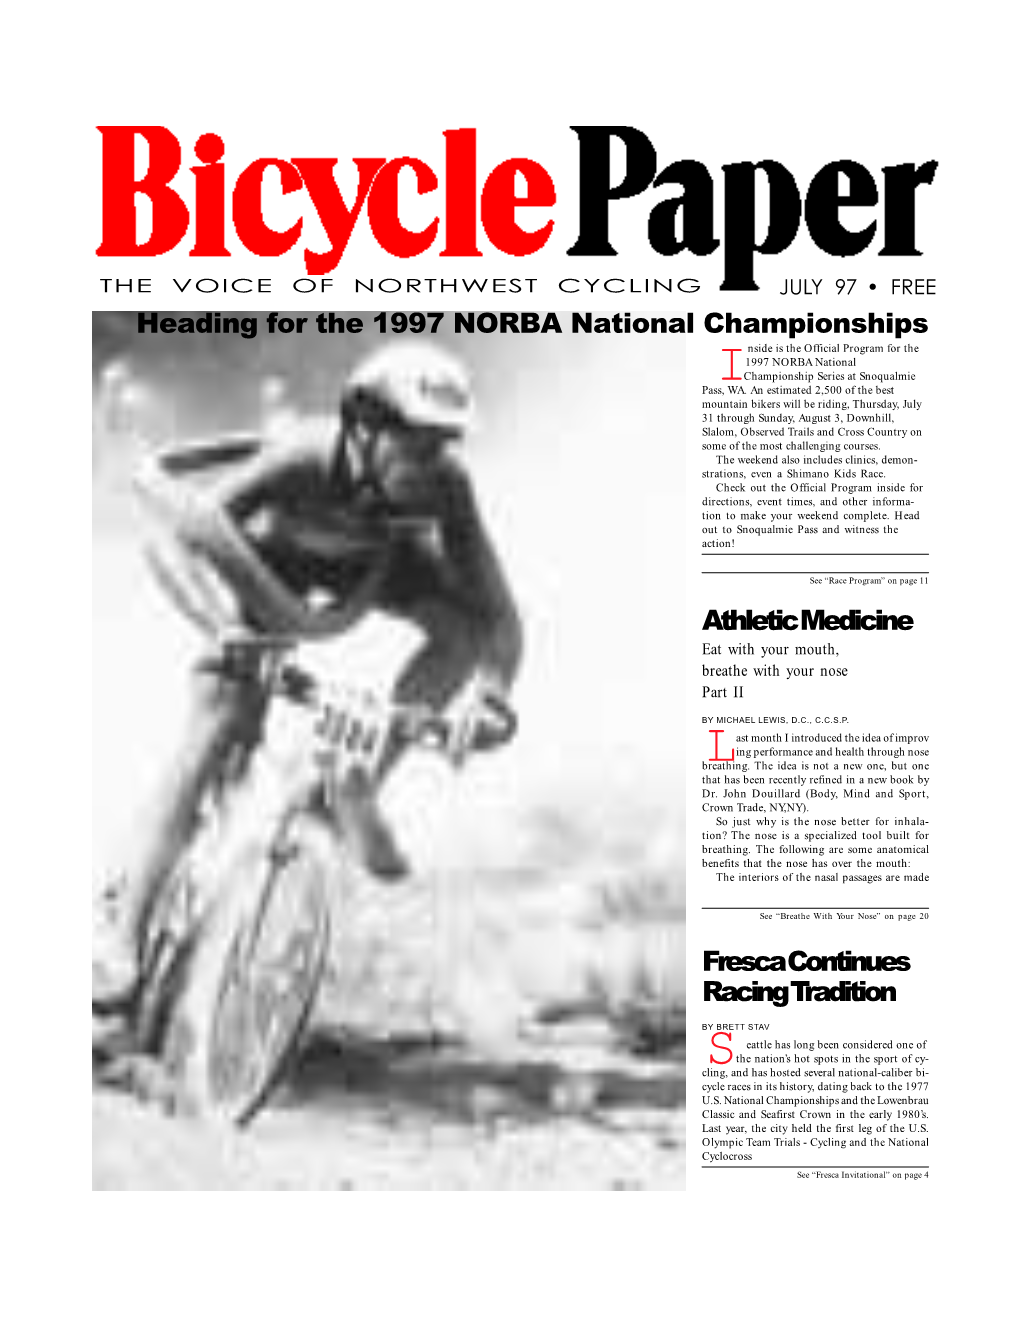 Fresca Continues Racing Tradition Athletic Medicine Heading for the 1997 NORBA National Championships